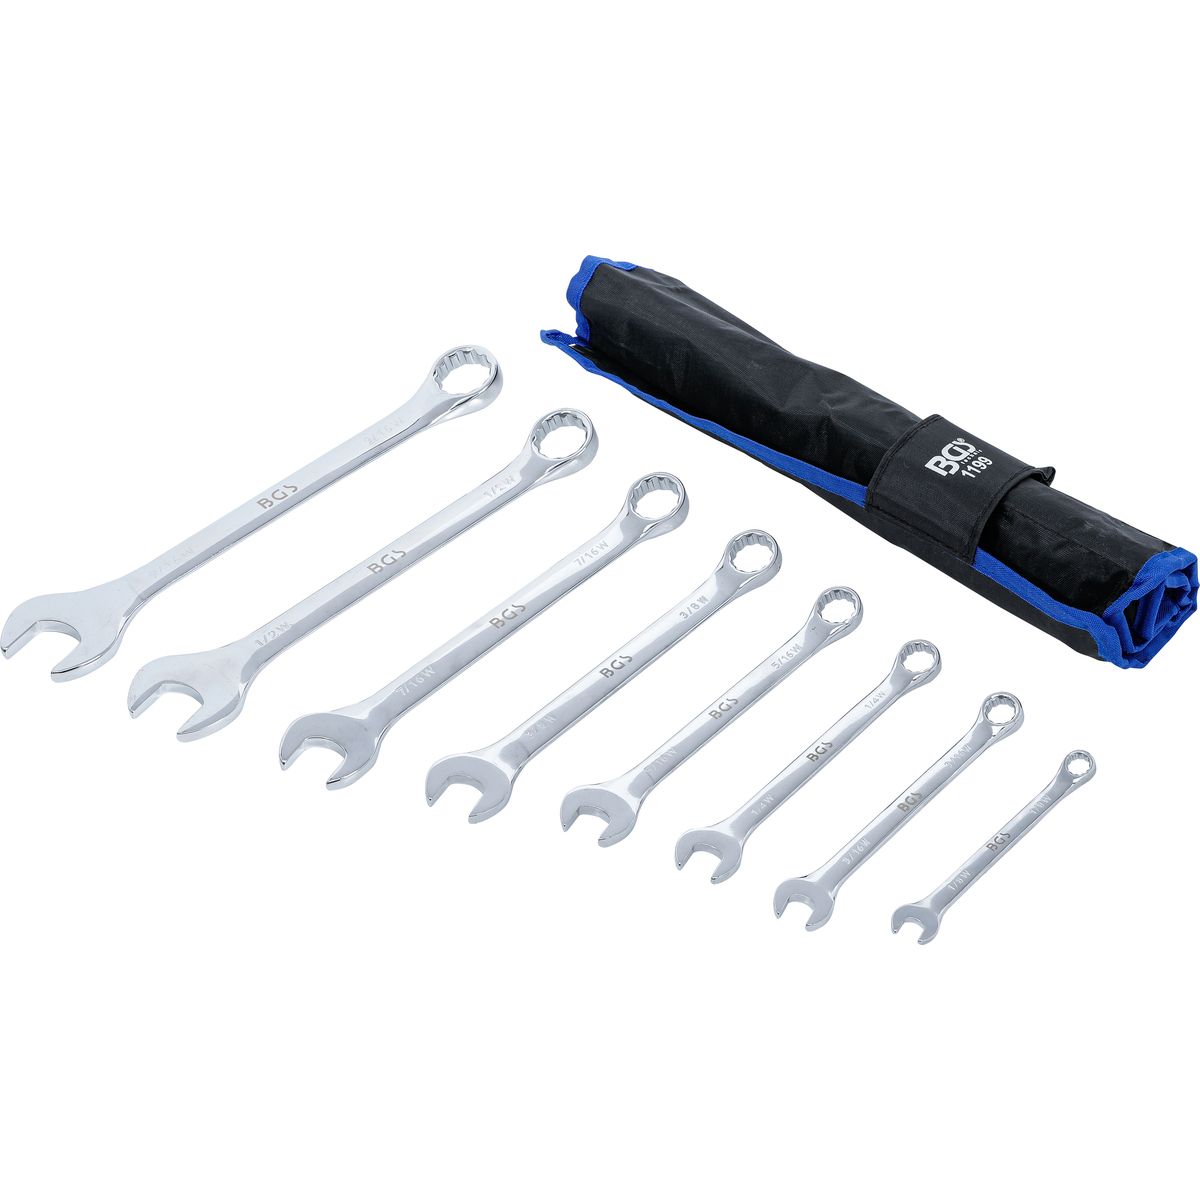 Combination Spanner Set | Inch Sizes | 1/8" - 9/16" Withworth | 8 pcs.